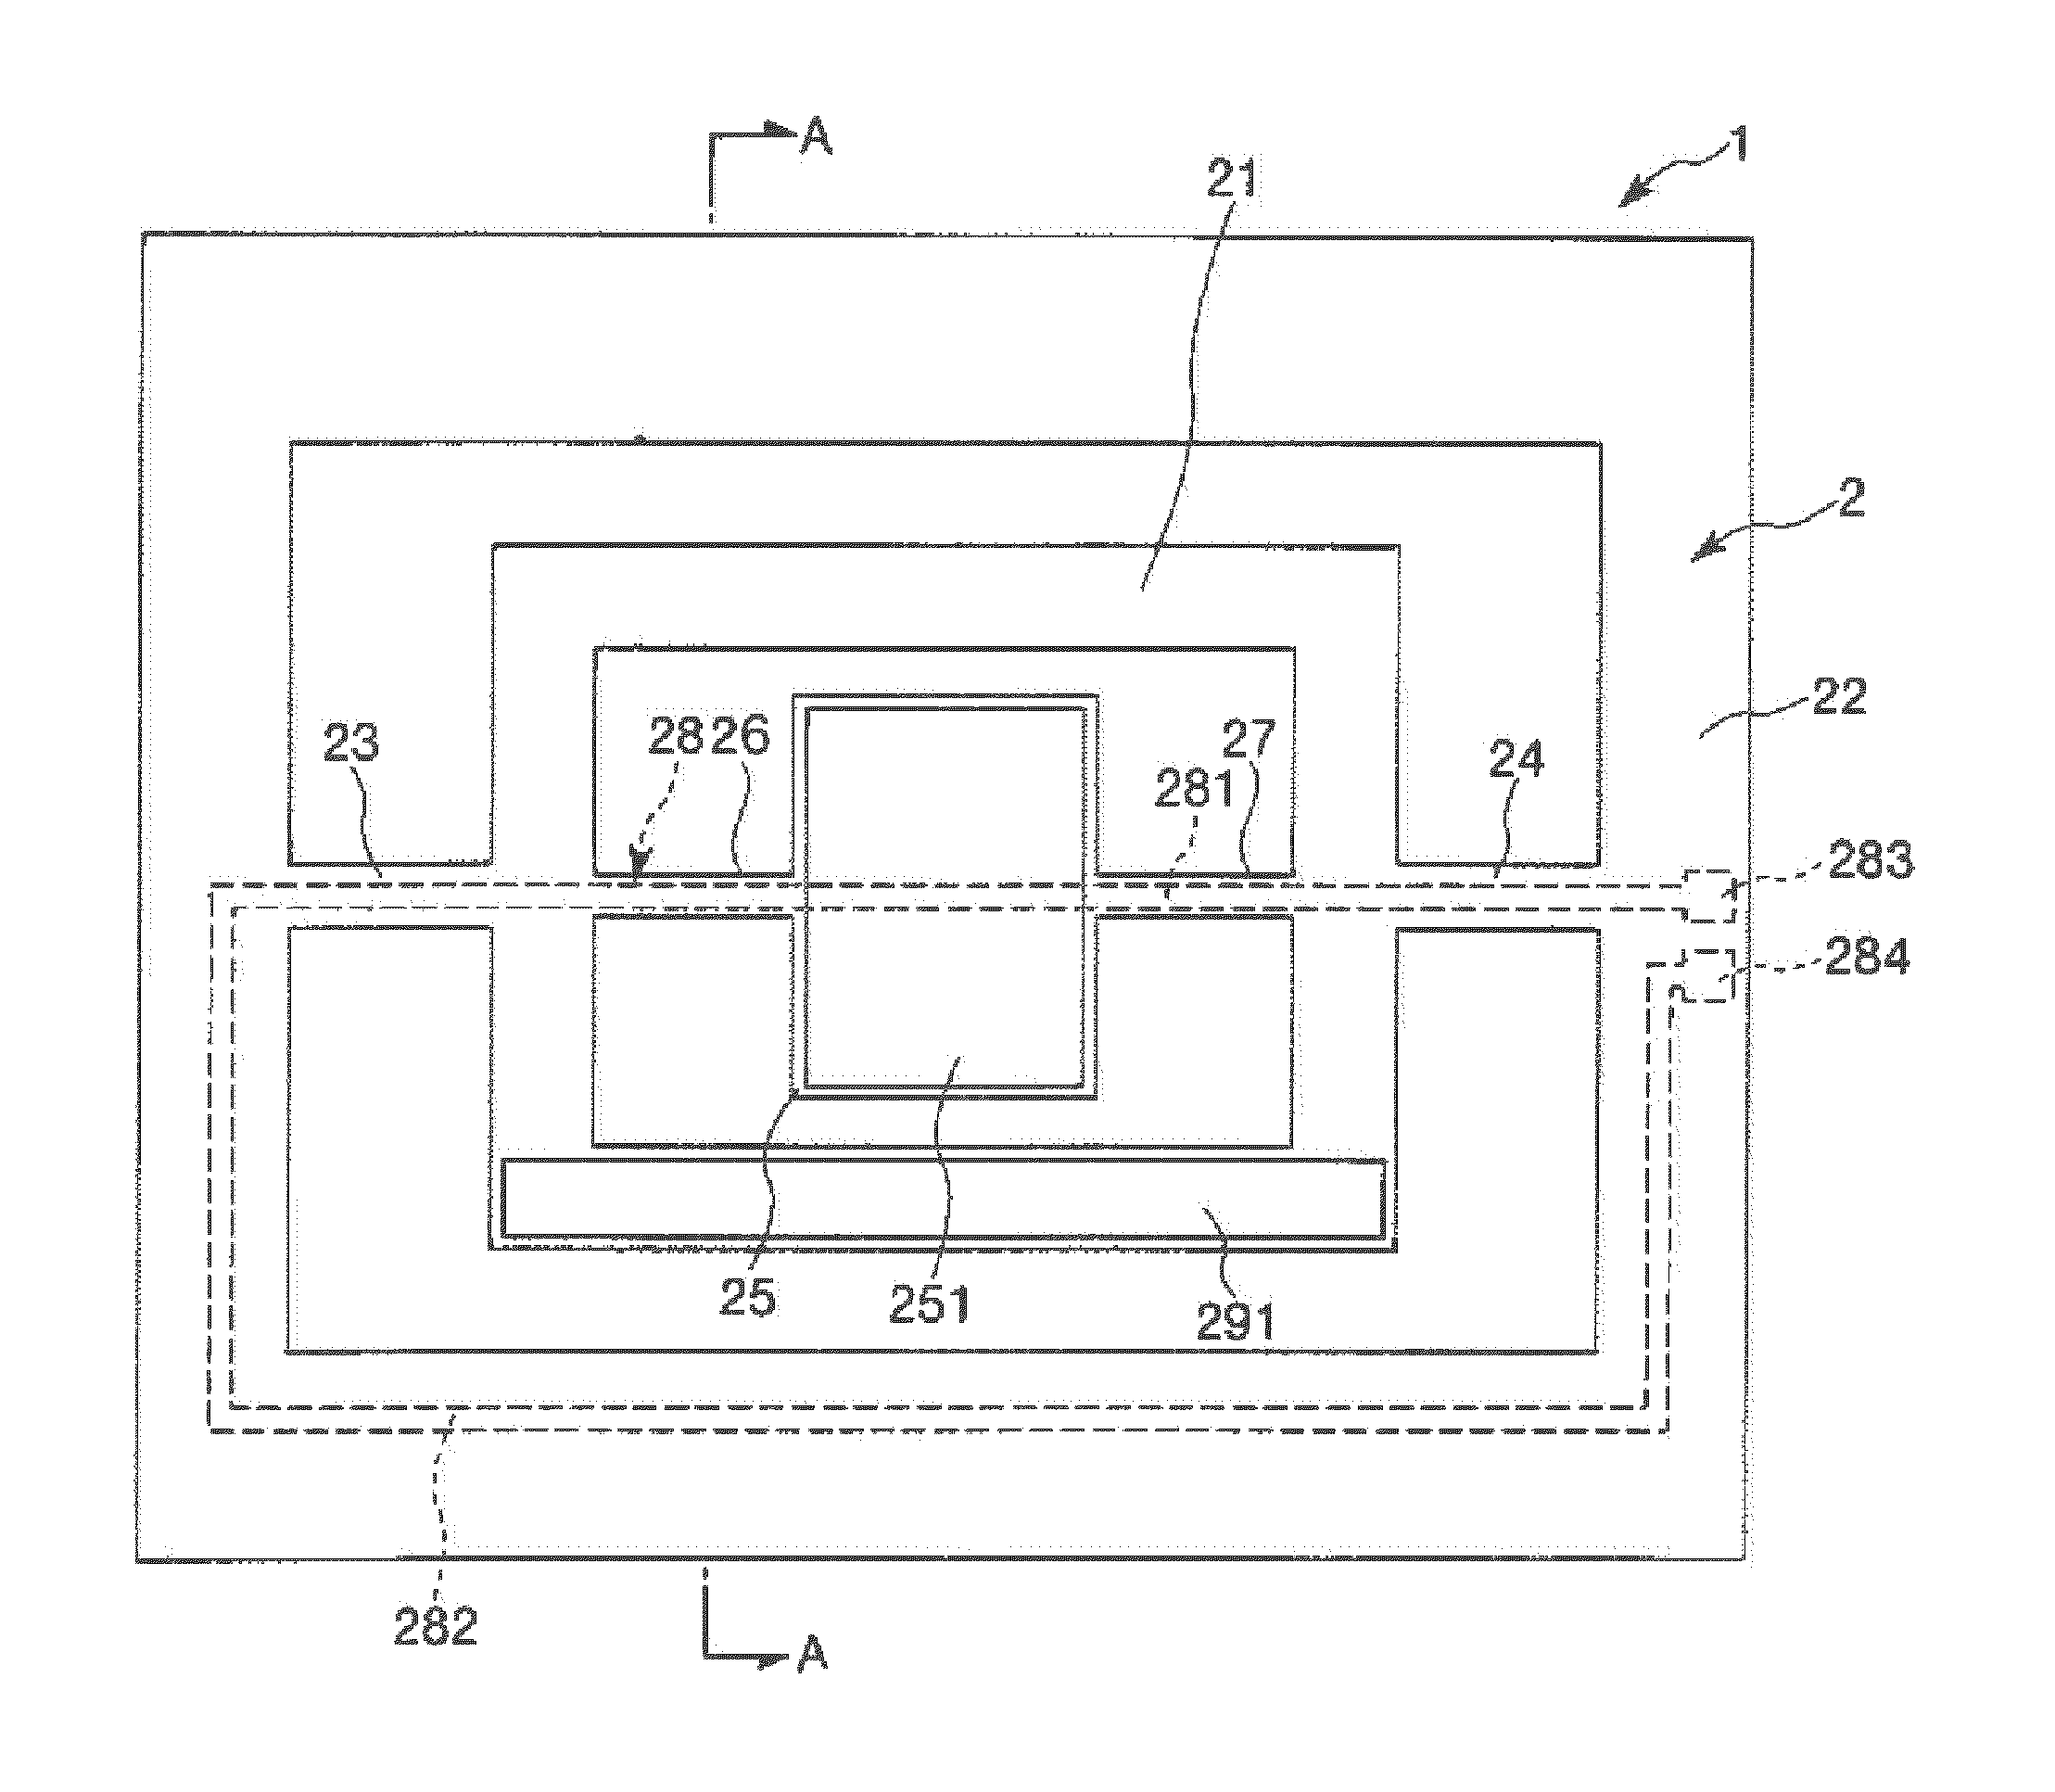 Actuator, optical scanner, and image forming apparatus